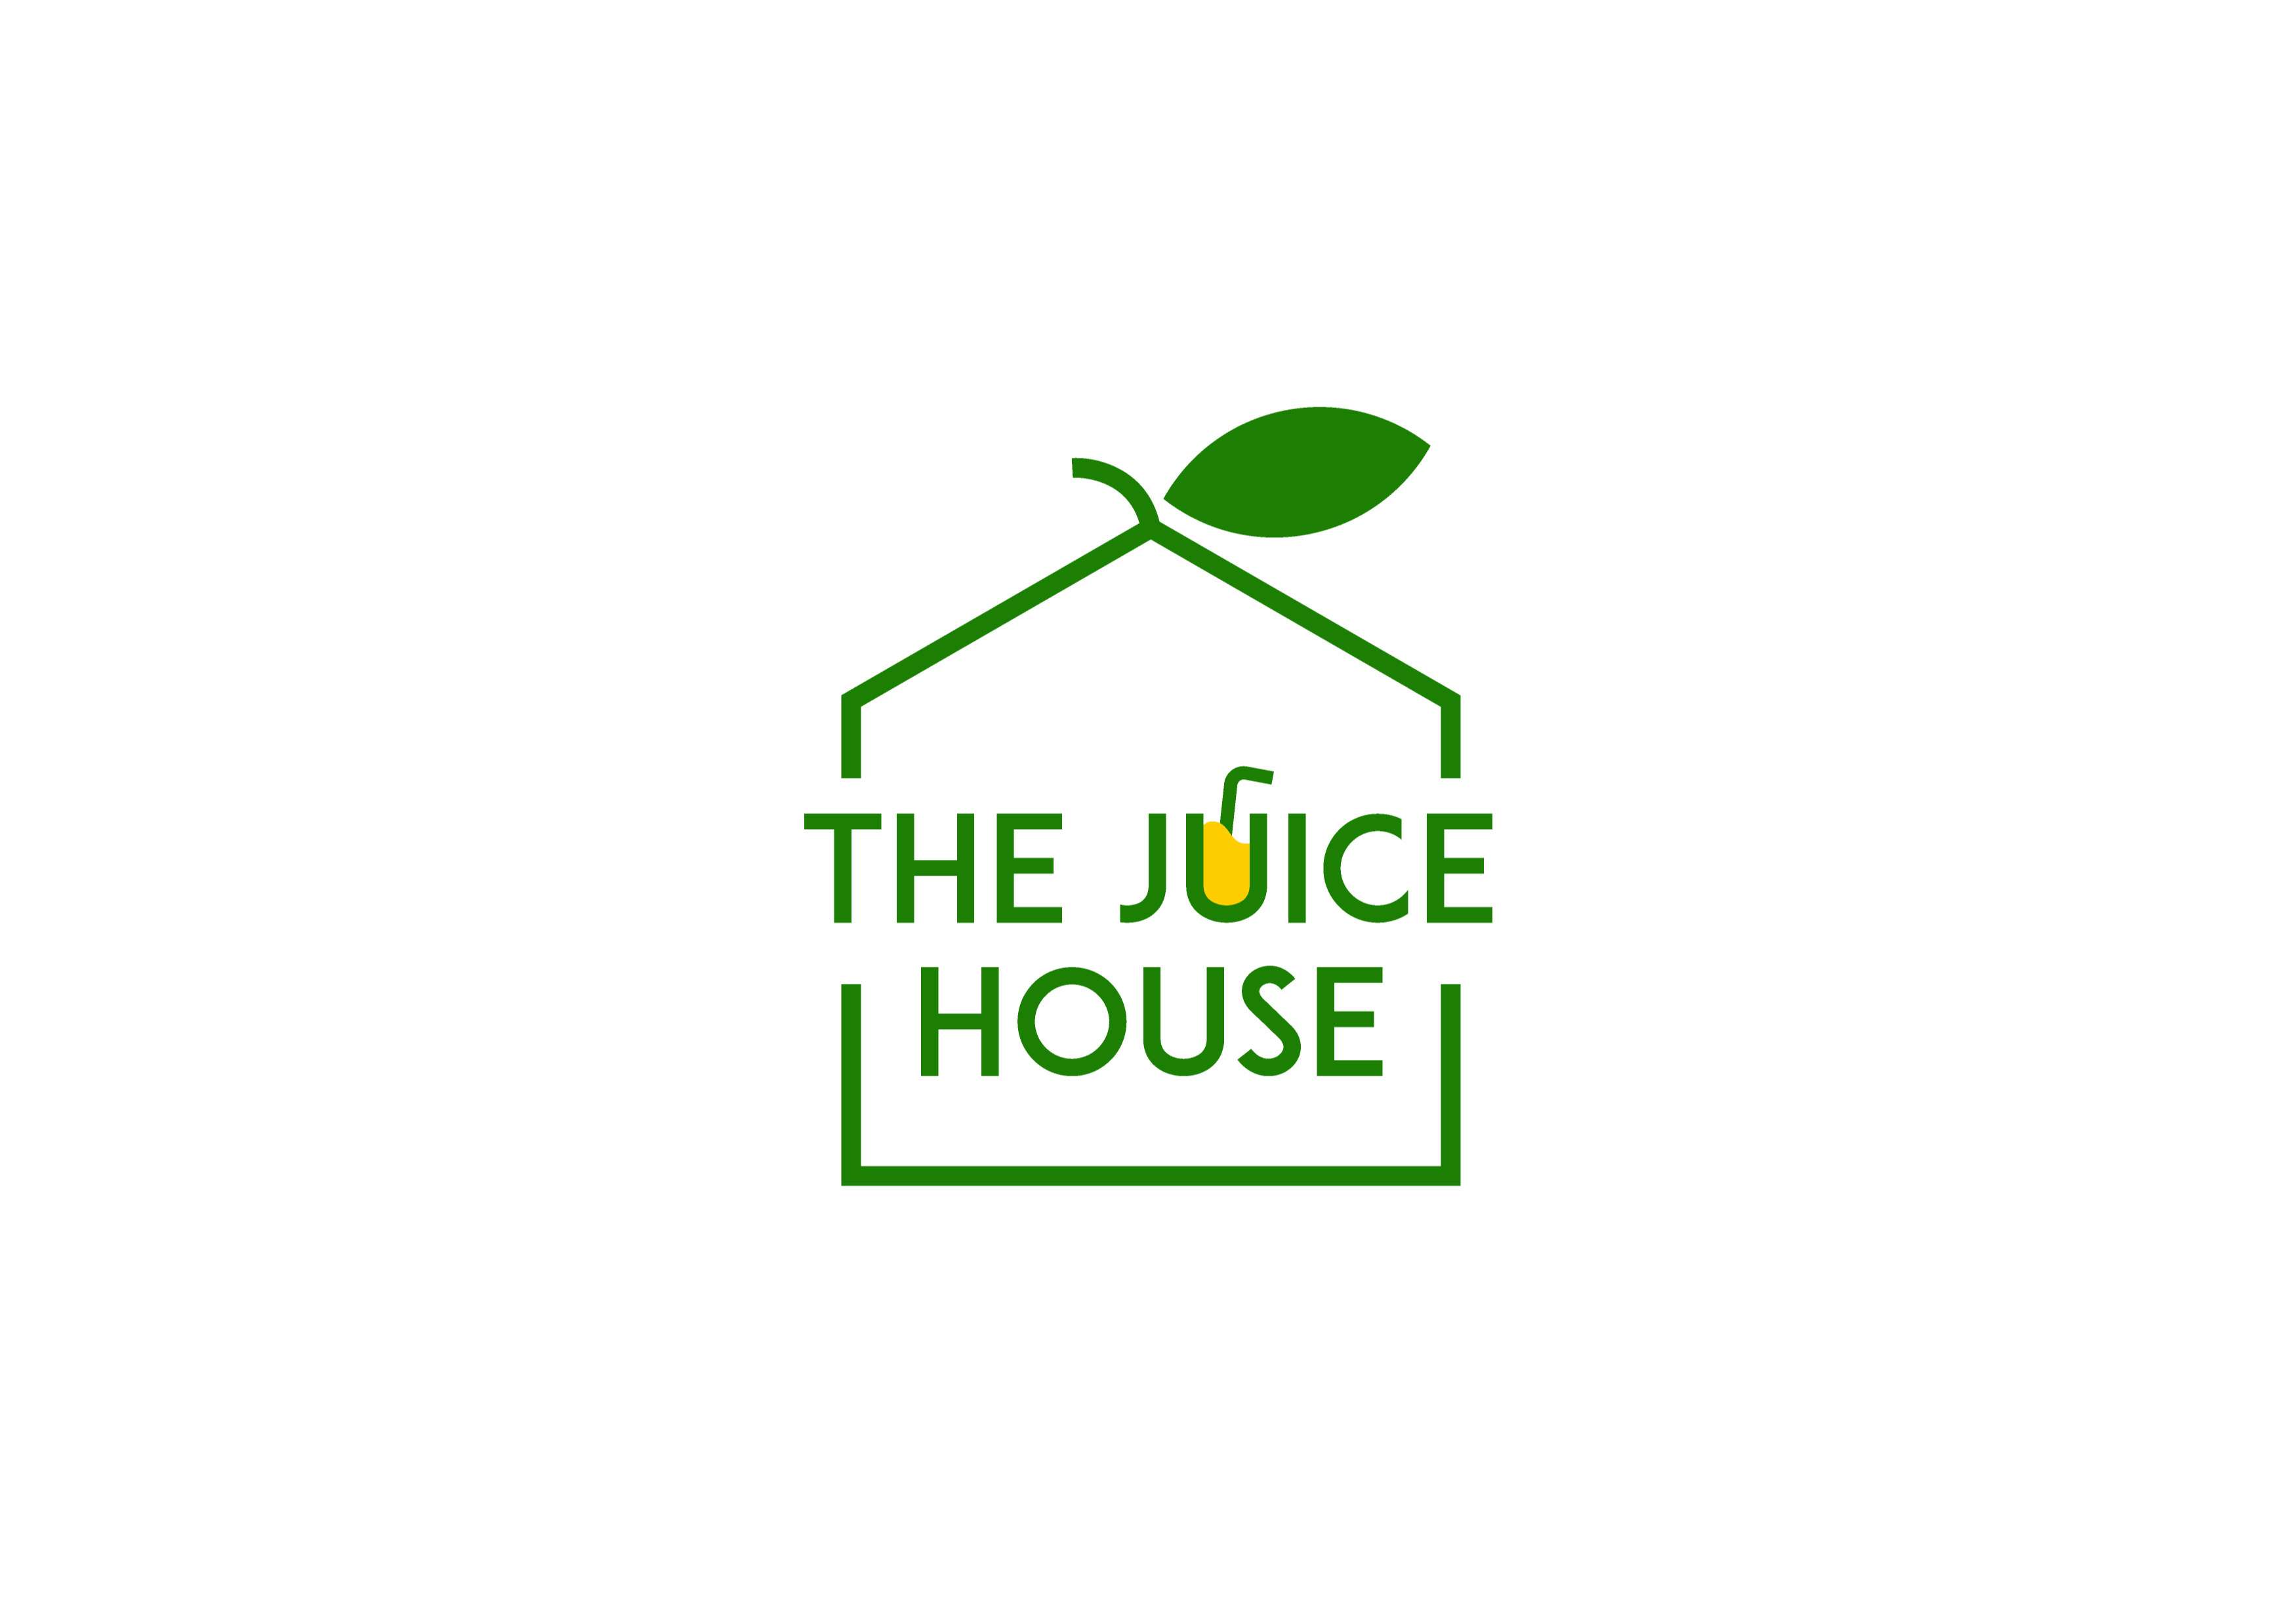 THIẾT KẾ LOGO THE JUICE HOUSE